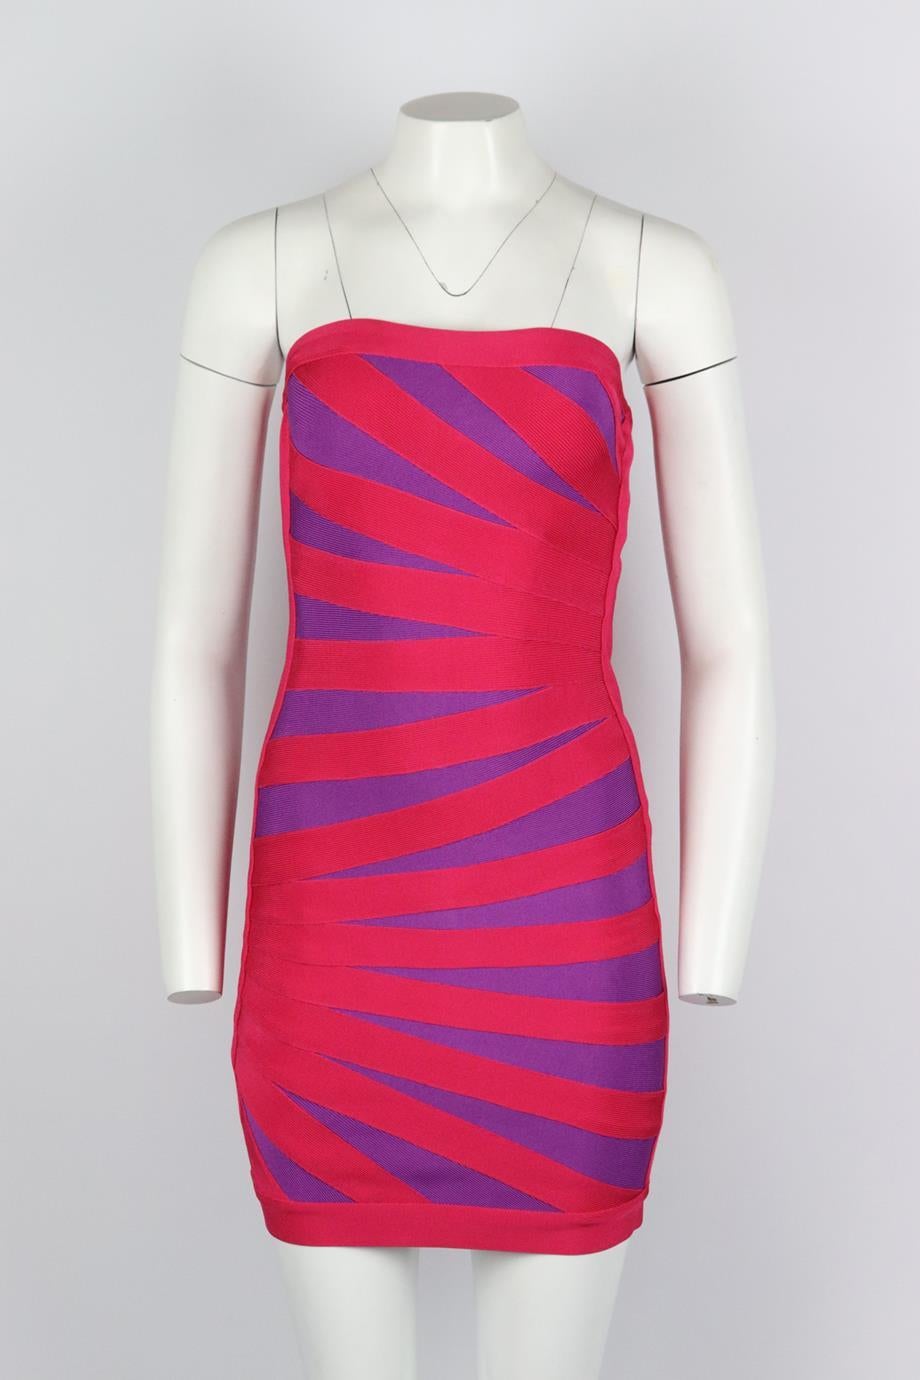 Herve Leger strapless bandage mini dress. Pink and purple. Sleeveless, bandeau. Zip fastening at back. 90% Rayon, 9% nylon, 1% spandex. Size: Small (UK 8, US 4, FR 36, IT 40). Bust: 27 in. Waist: 24.4 in. Hips: 30.6 in. Length: 27 in. Very good